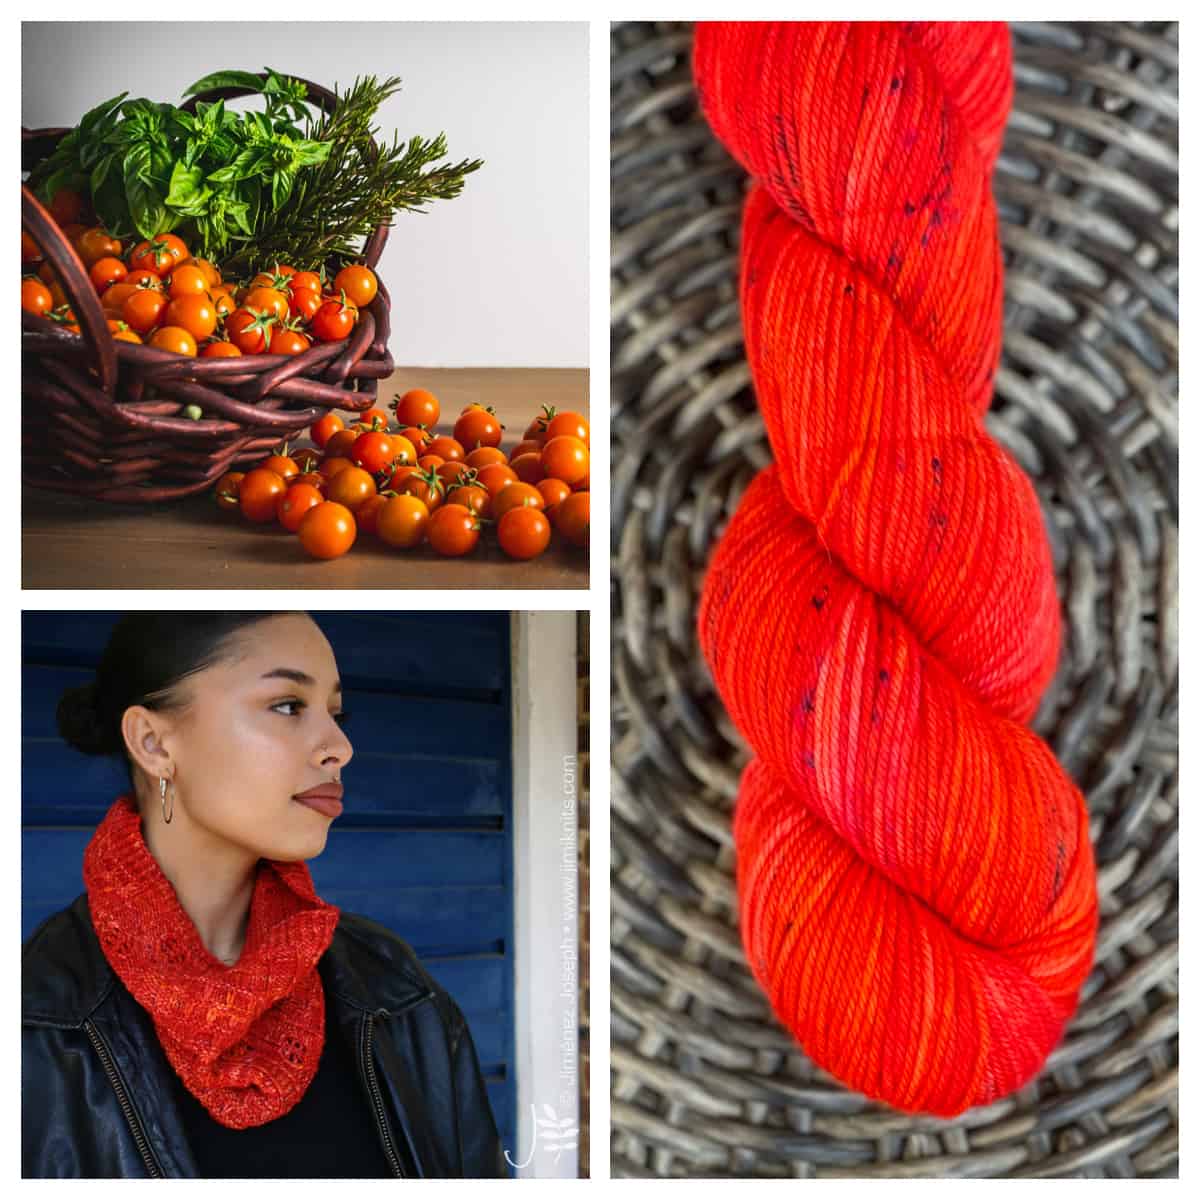 A basket of tomatoes, a skein of bright red-orange yarn and a brown-skinned woman wearing a red textured cowl over a black leather jacket.